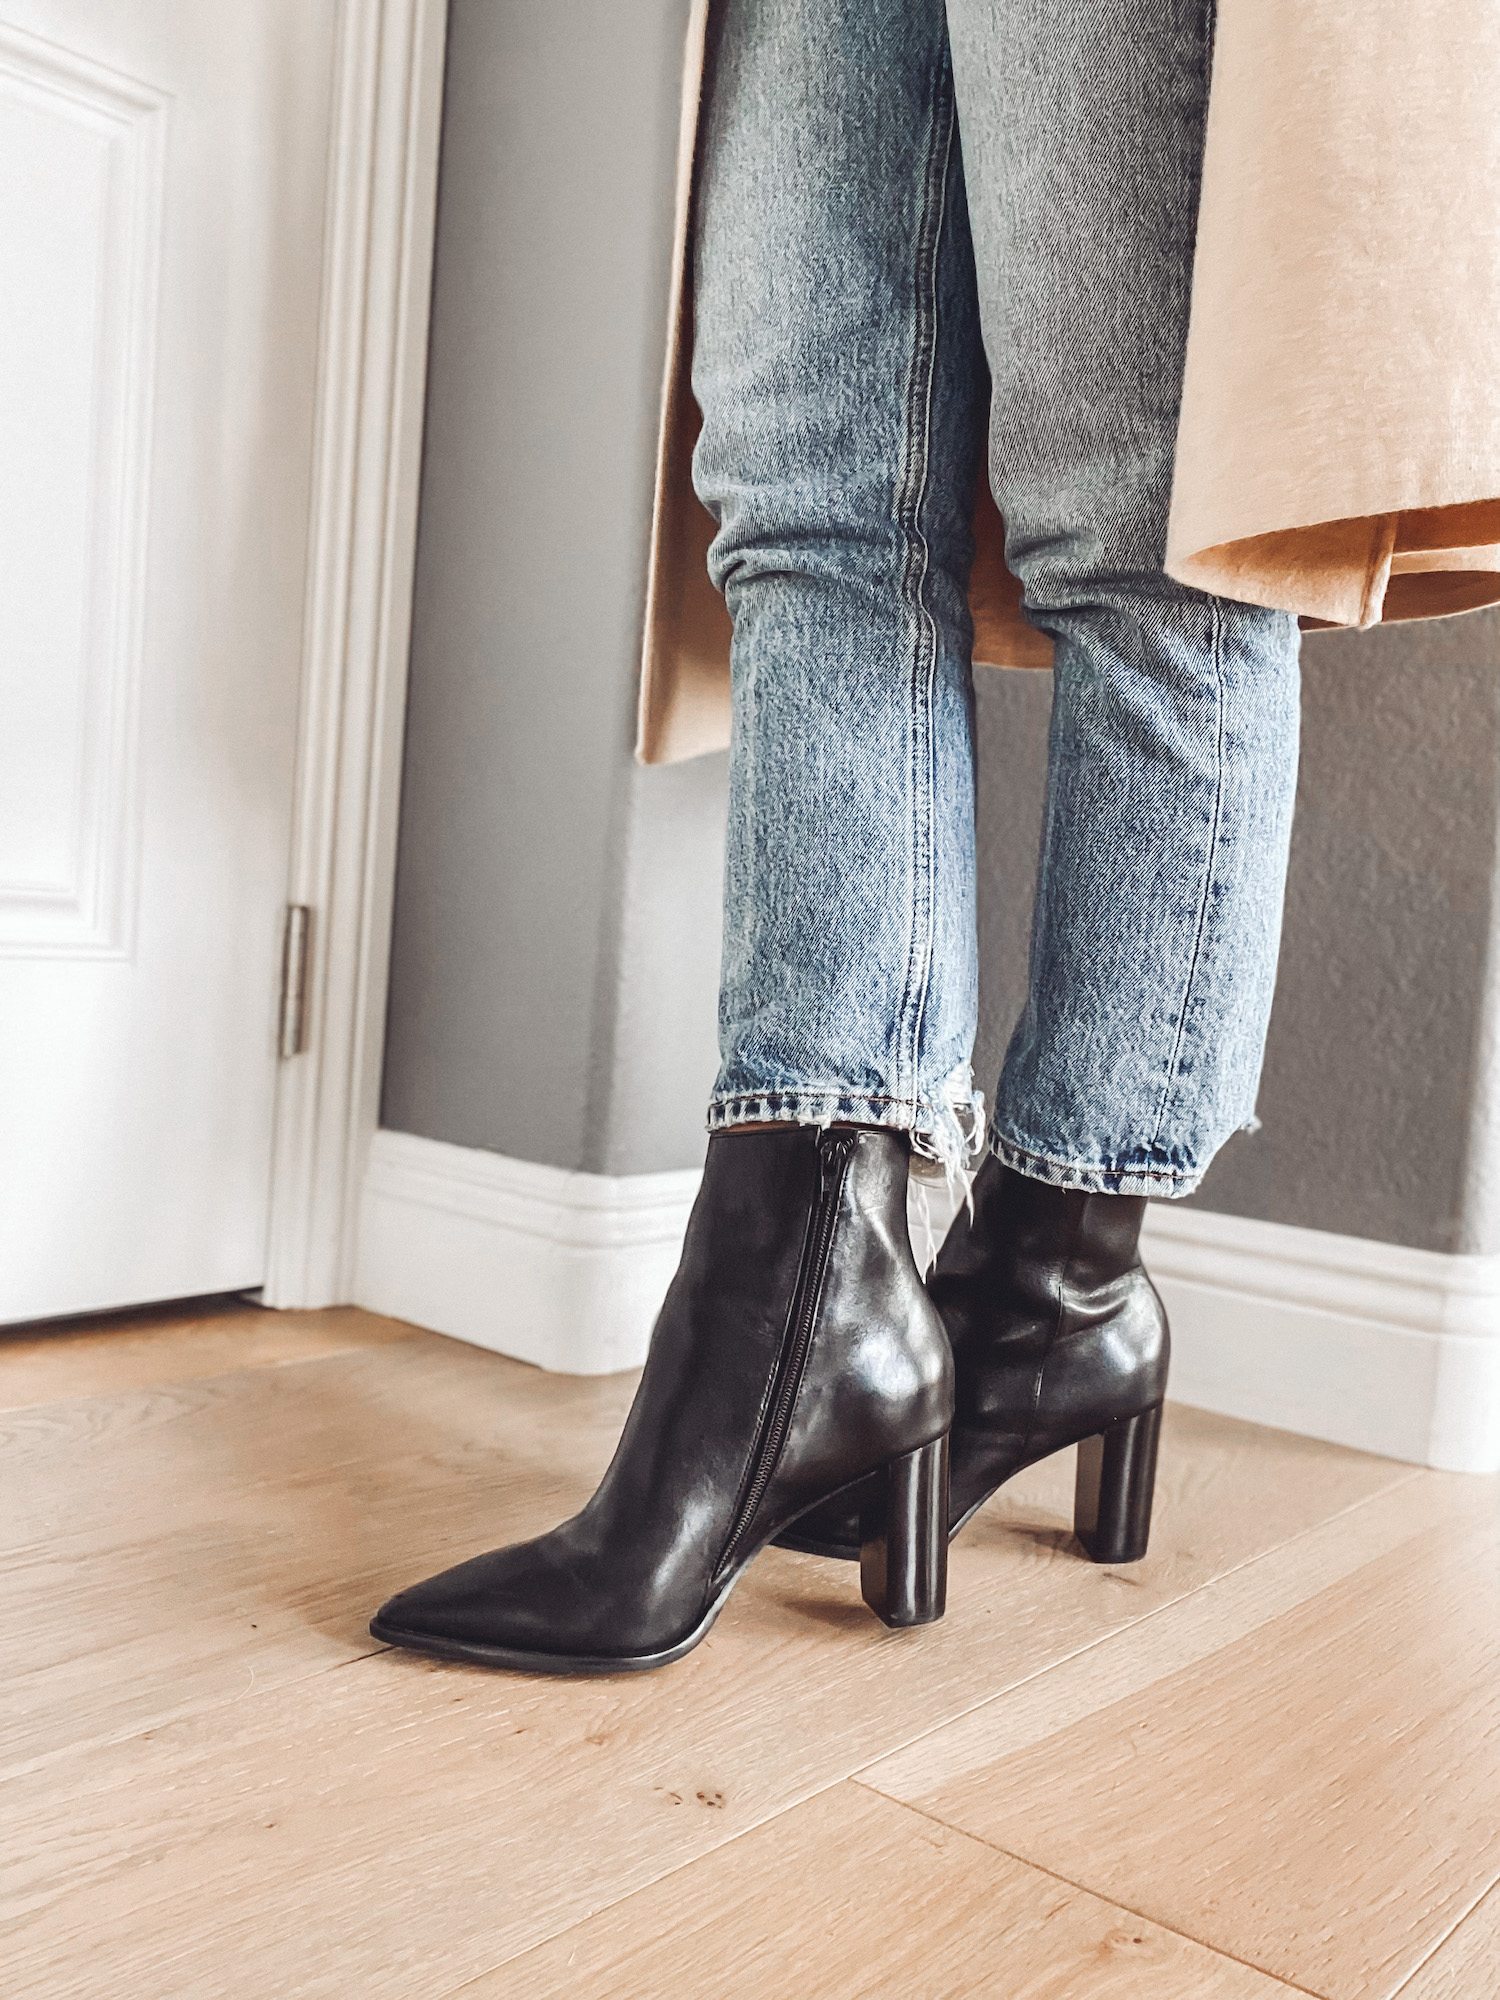 How to wear BOOTS with JEANS